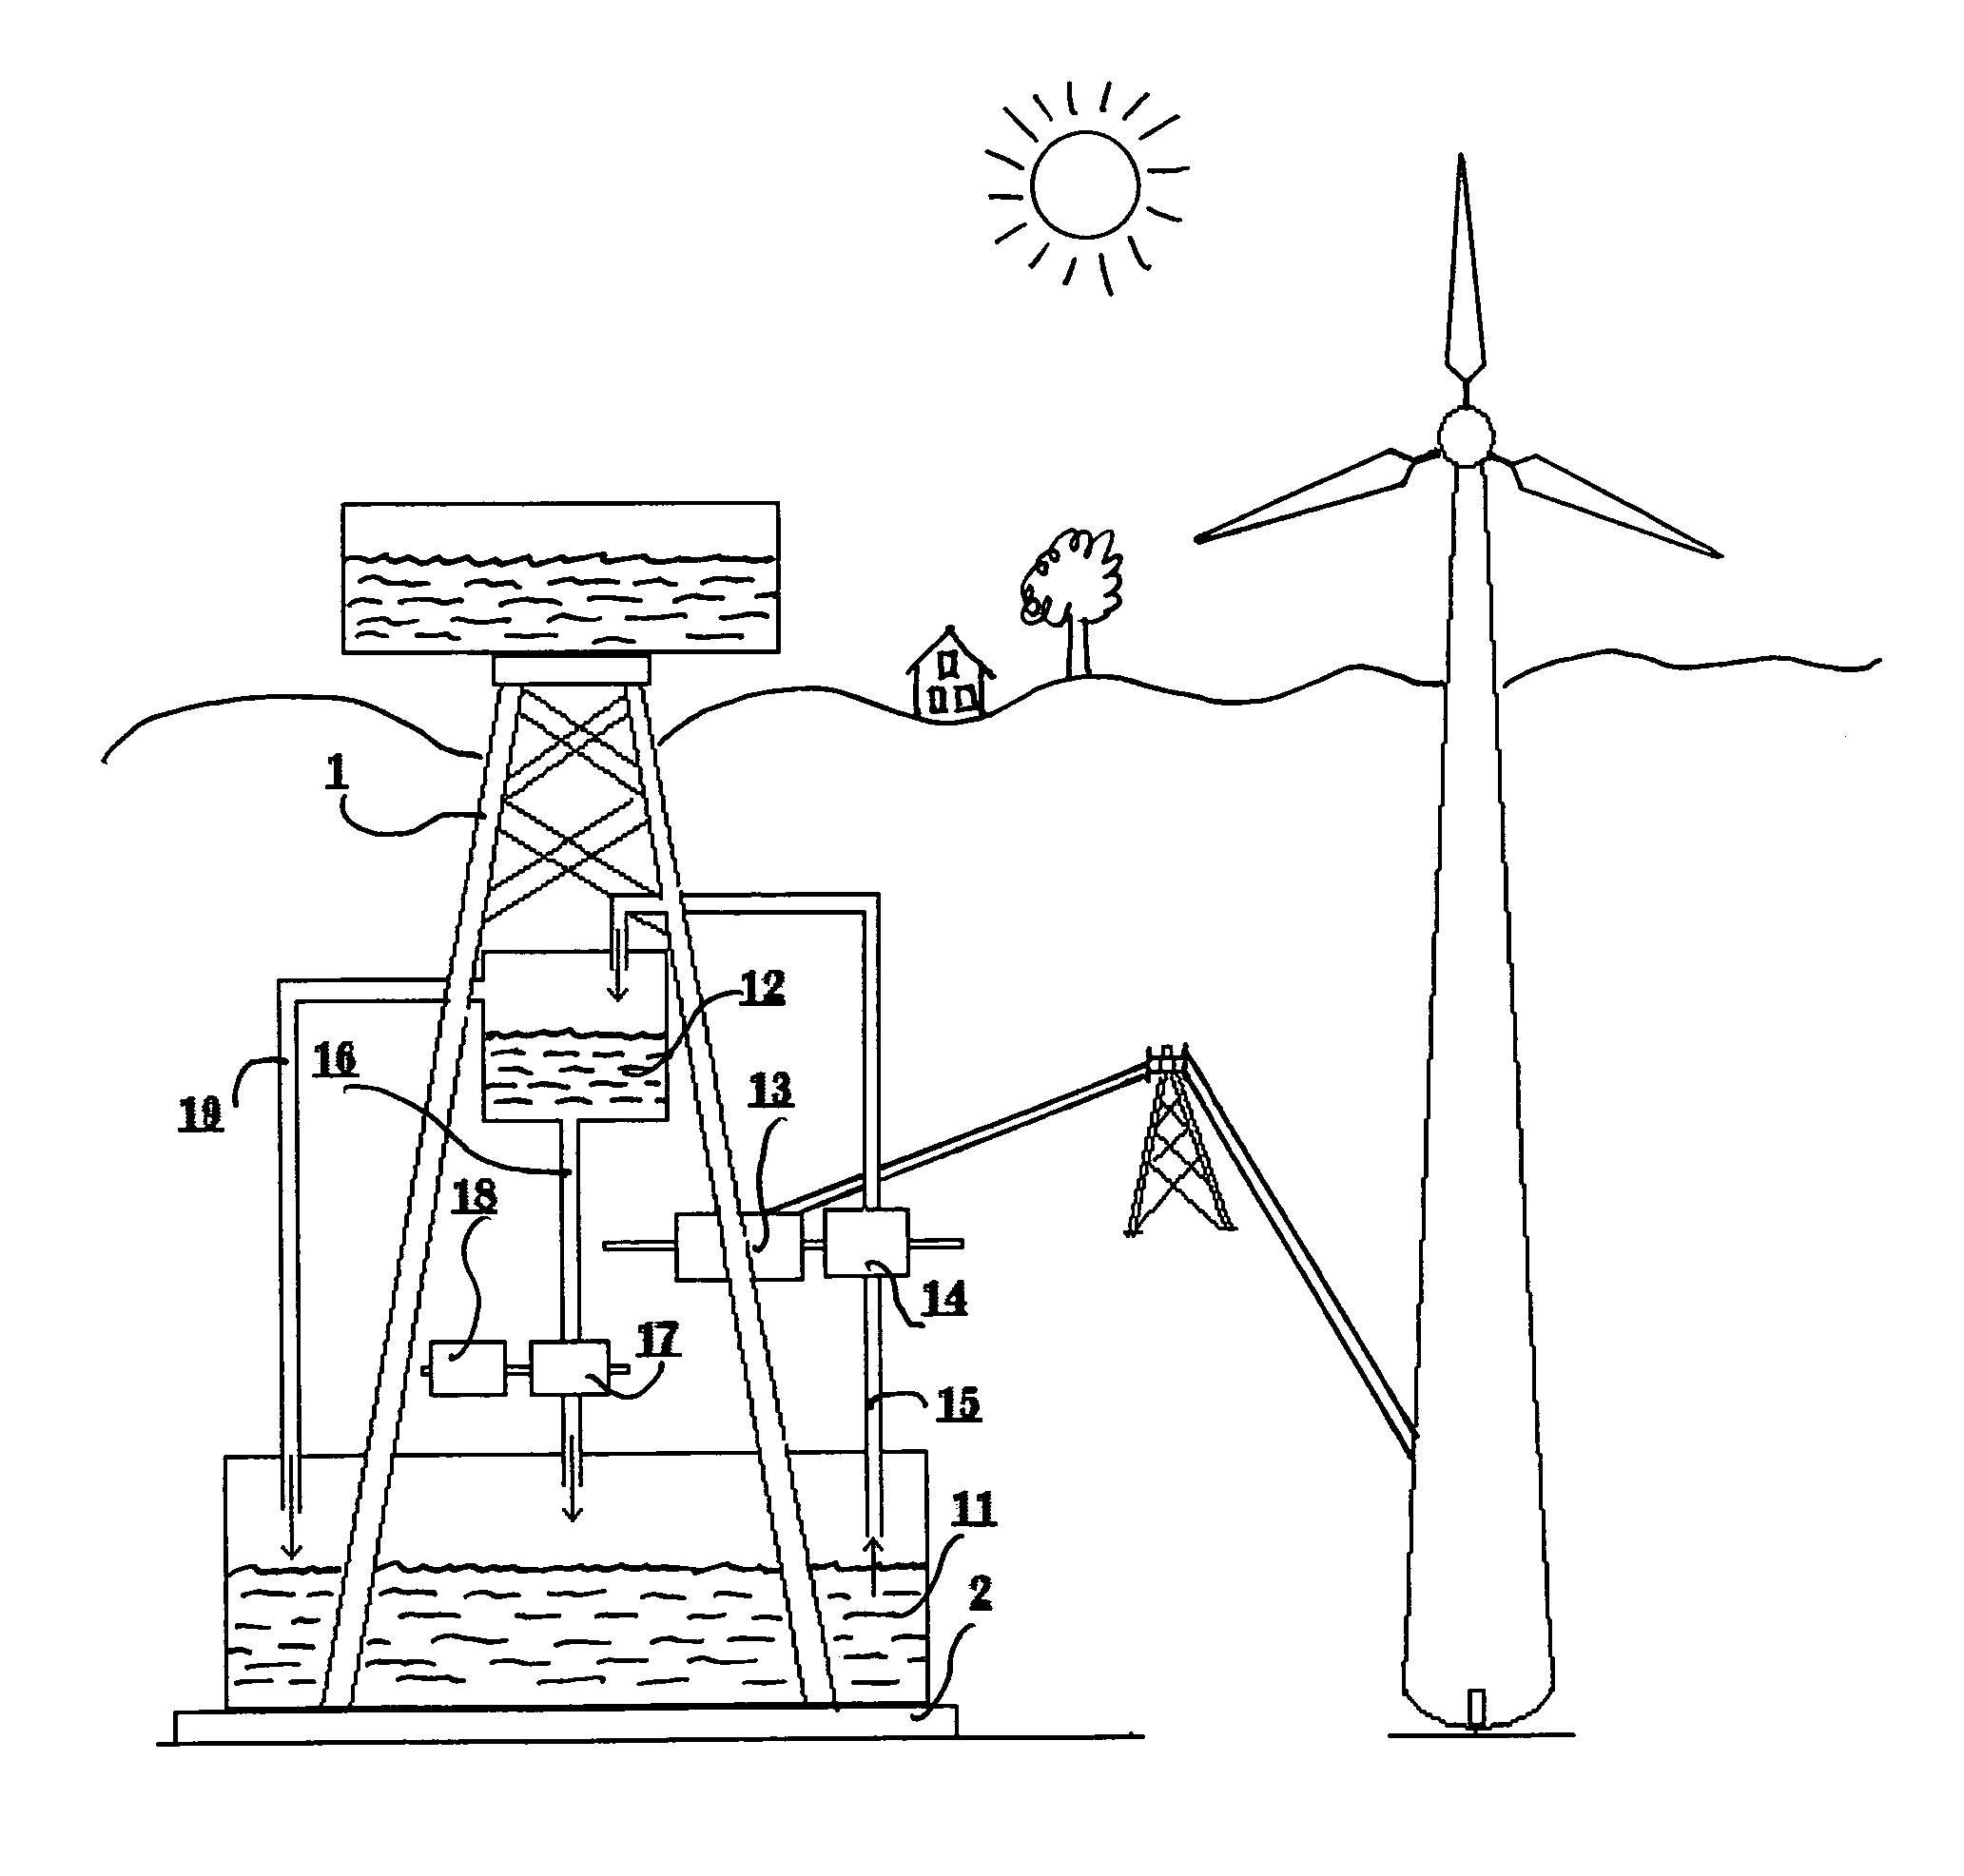 Hybrid water pressure energy accumulating tower(s) connected to a wind turbine or power plants